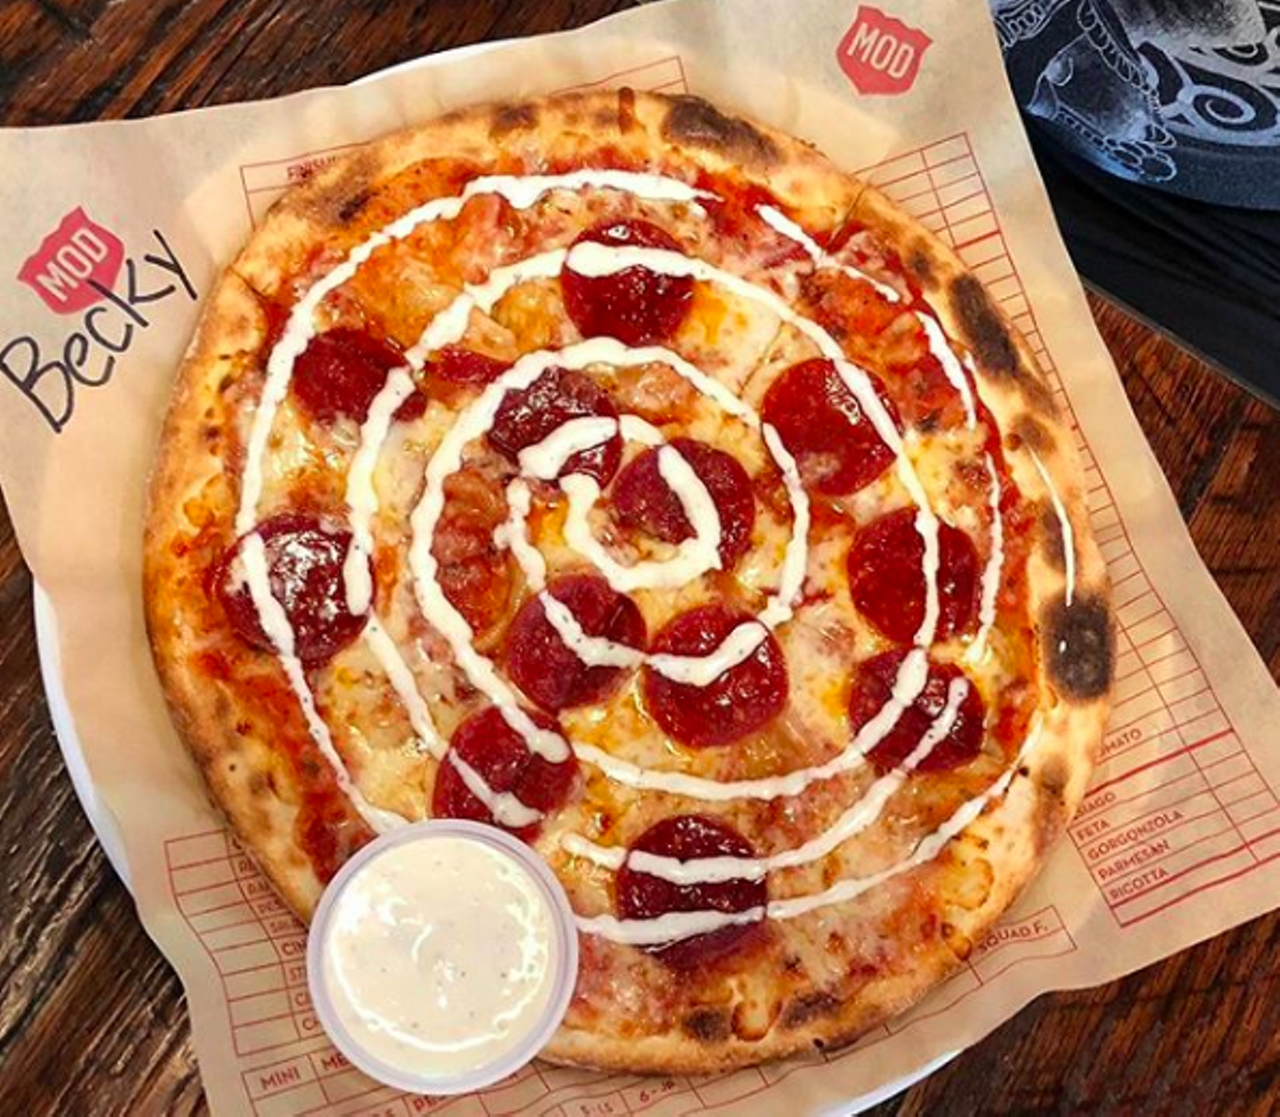 MOD Pizza
8211 State Hwy 151, Suite 101, (210) 817-6665, modpizza.com
The fast, DIY pizza spot keeps on growing here in San Antonio. MOD celebrated the grand opening of its Westover Marketplace location (151 and 410) on June 29 with giveaways.
Photo via Instagram / modpizza